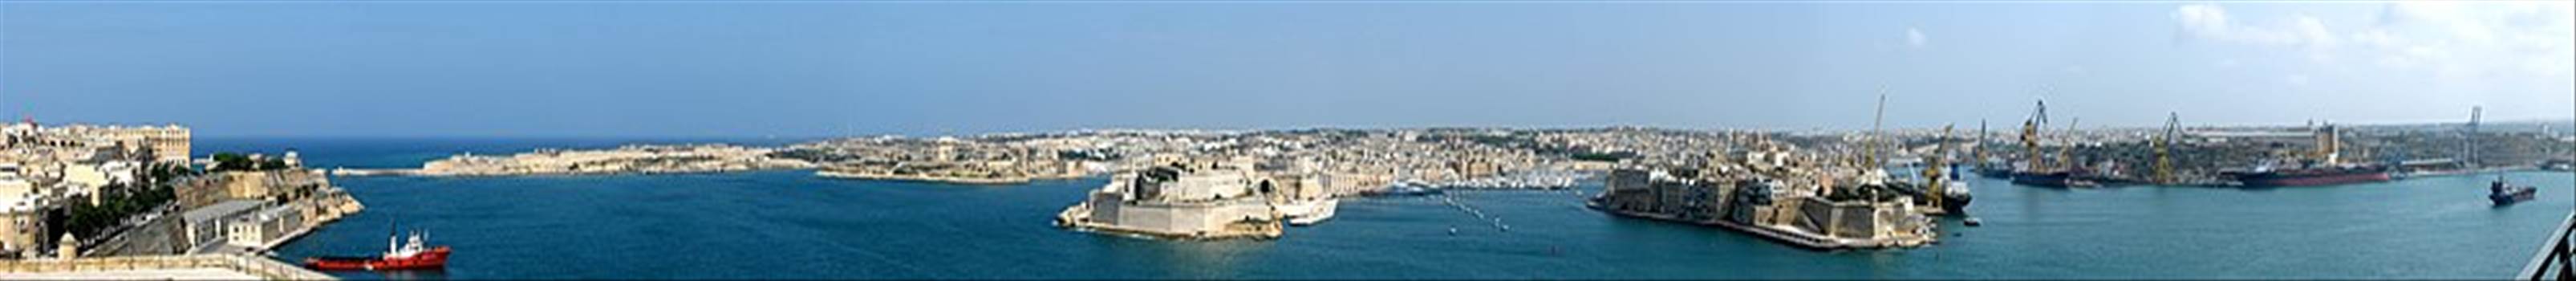 Valletta_Grand_Harbour_Panorama.jpg by LordDUnivers